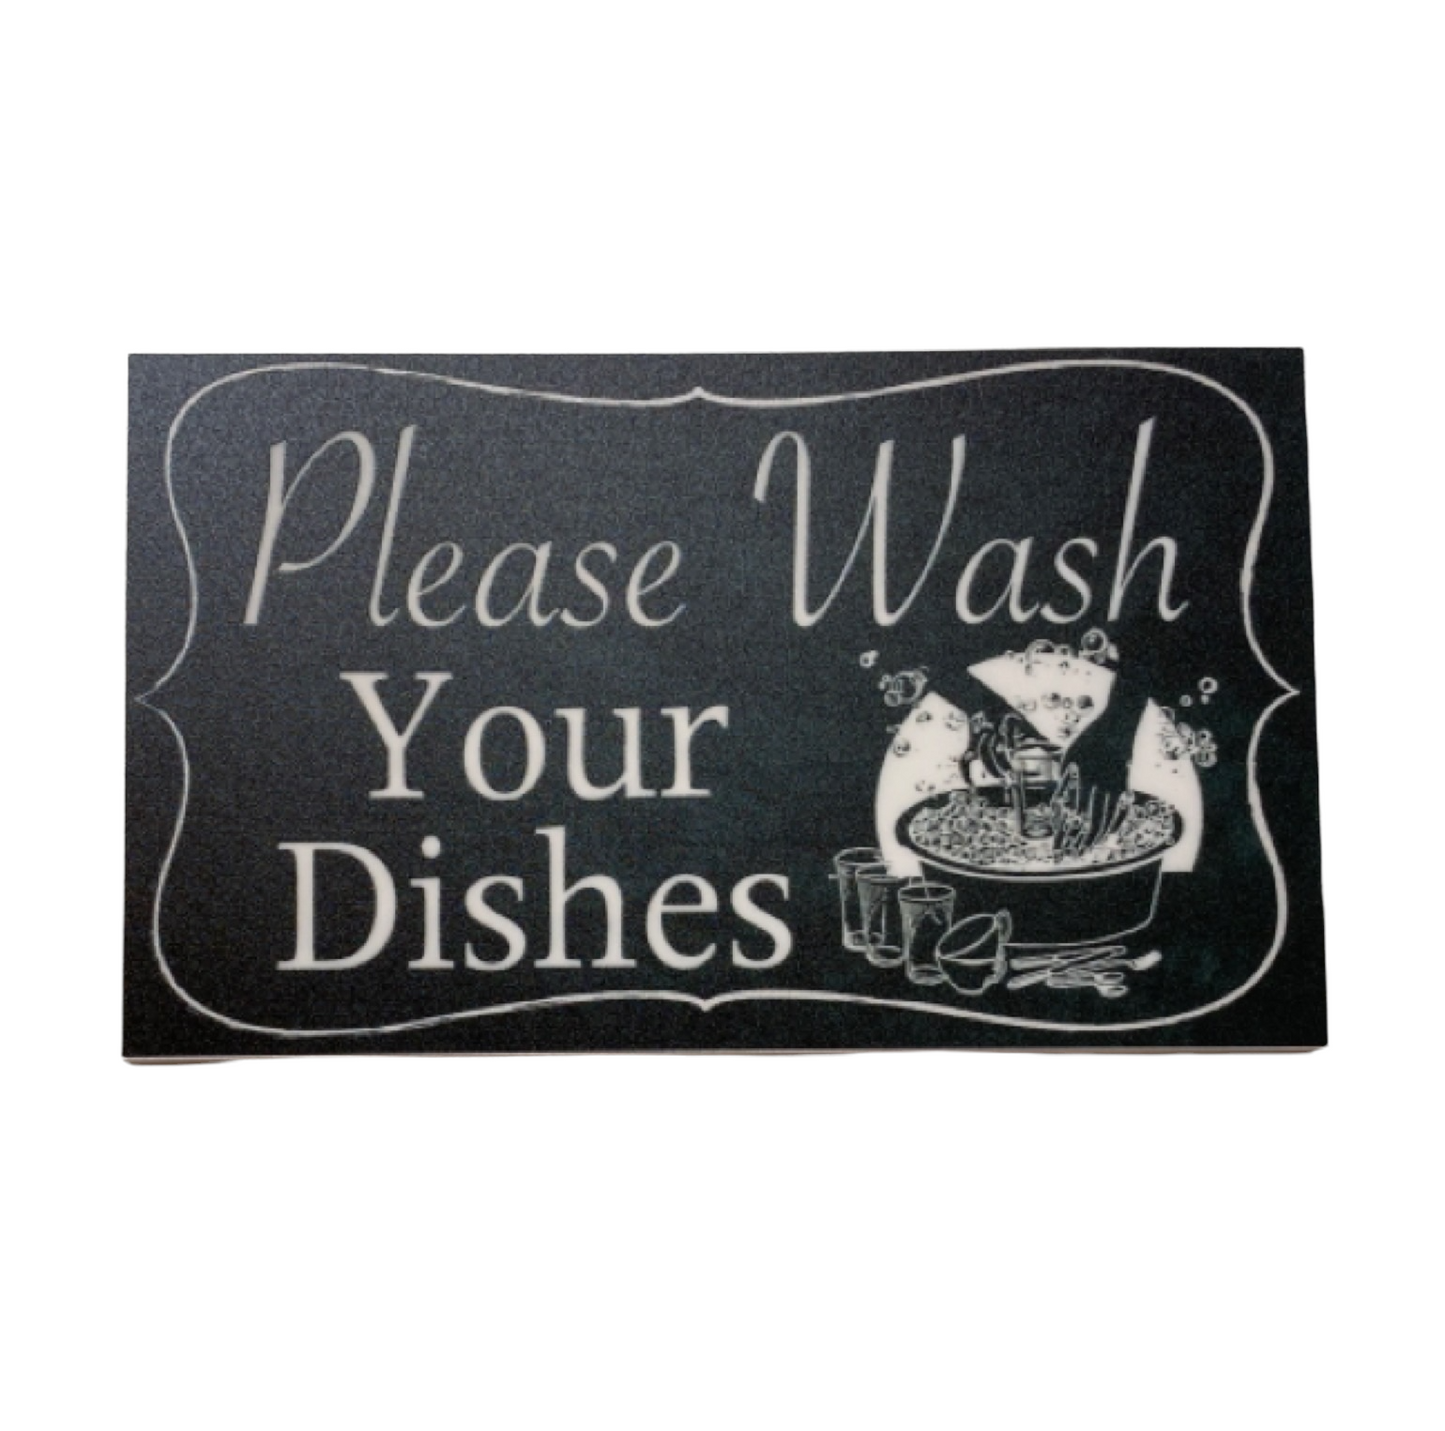 Wash Your Dishes Vintage Kitchen Sign - The Renmy Store Homewares & Gifts 